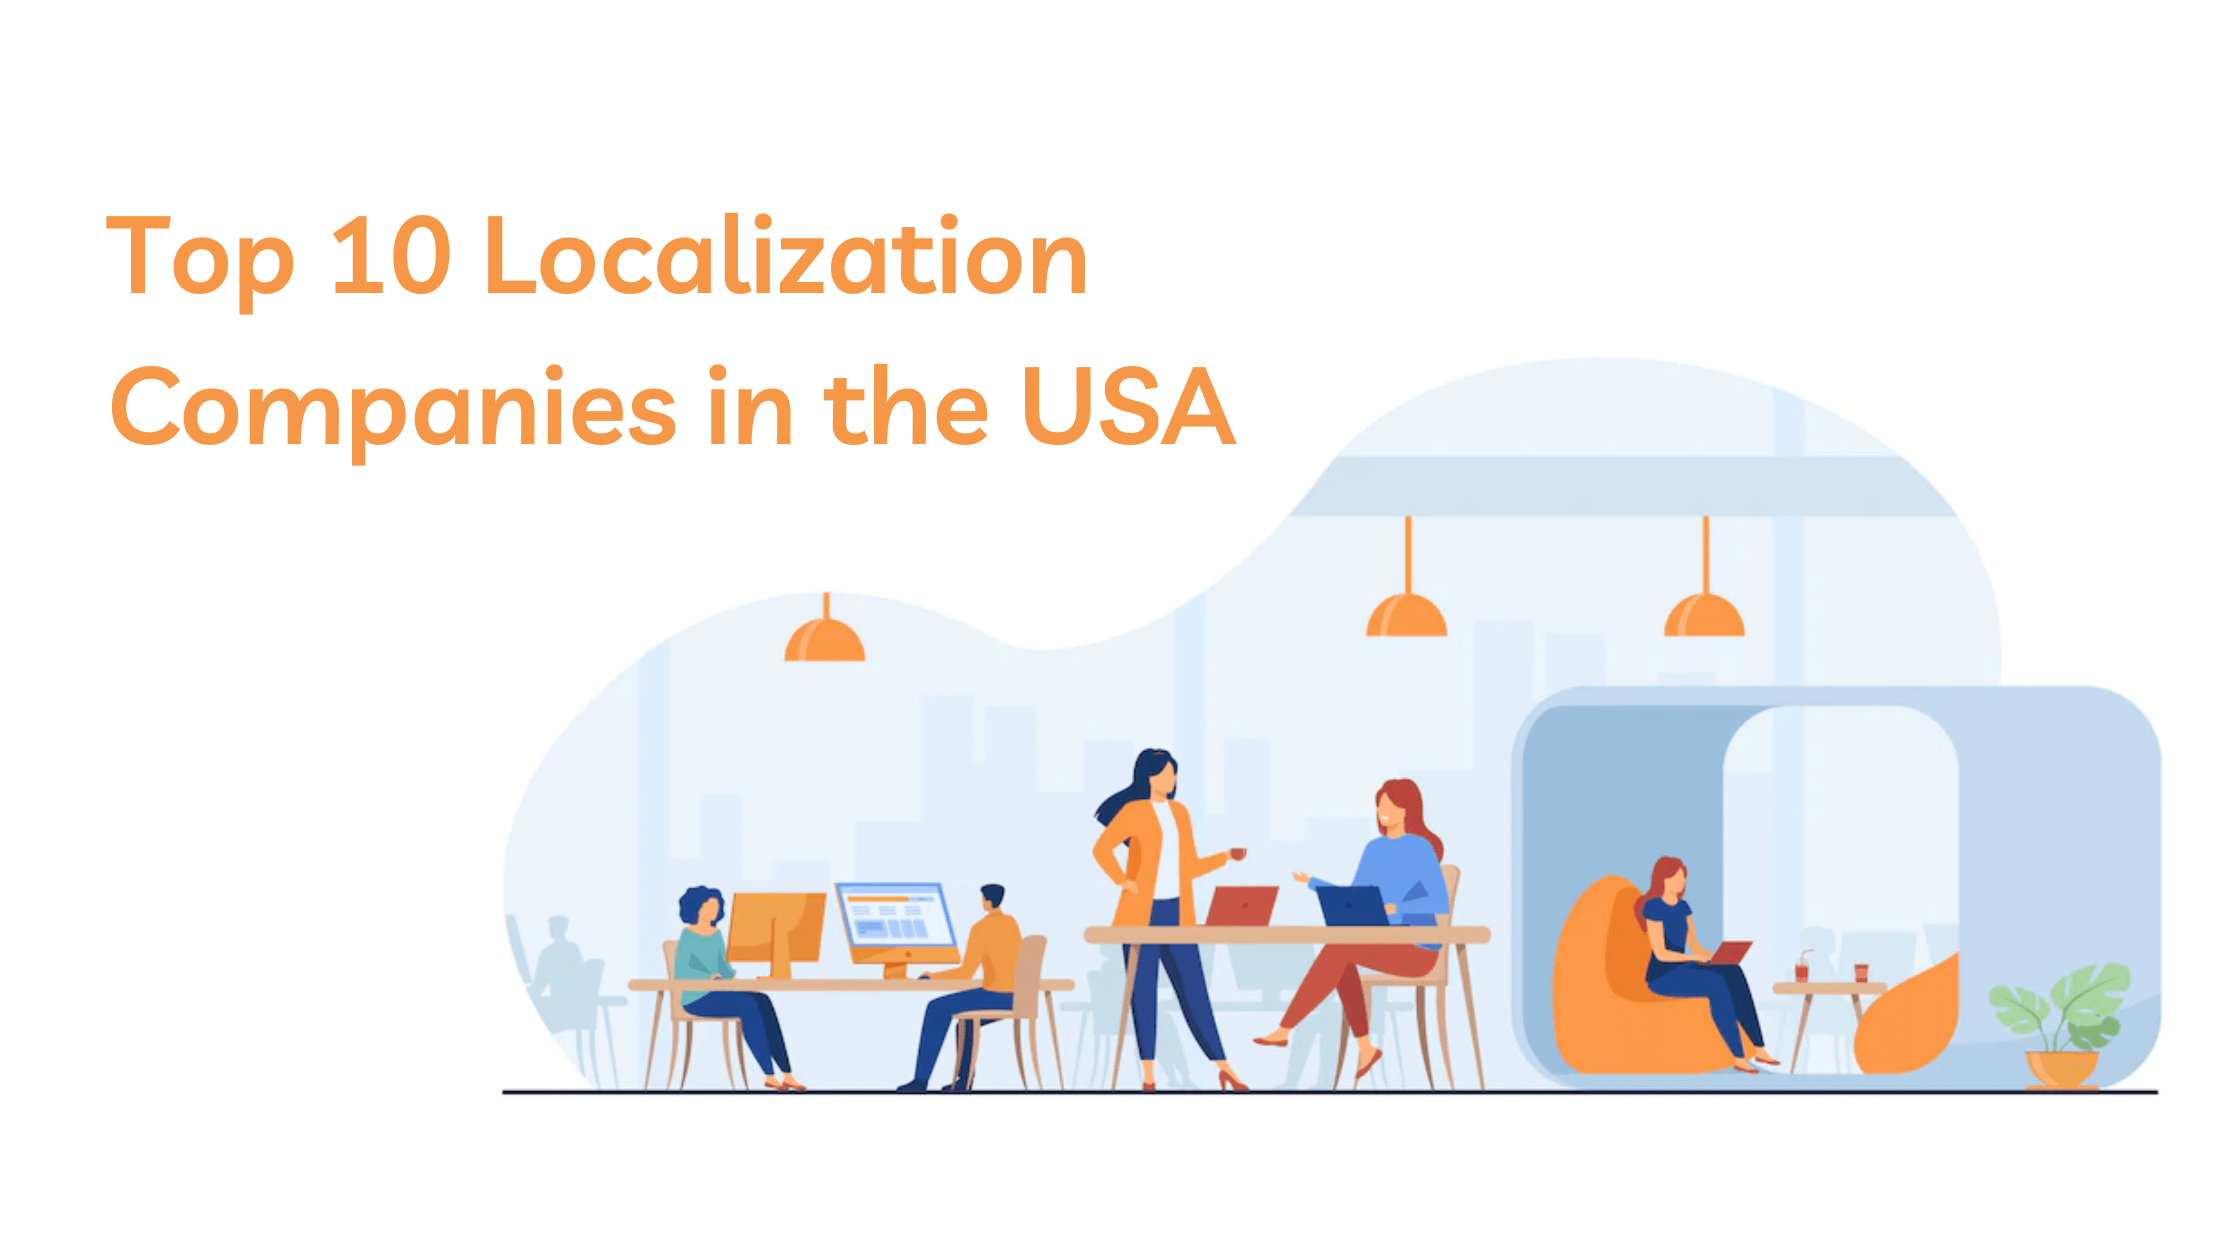 Top Localisation Companies in the USA